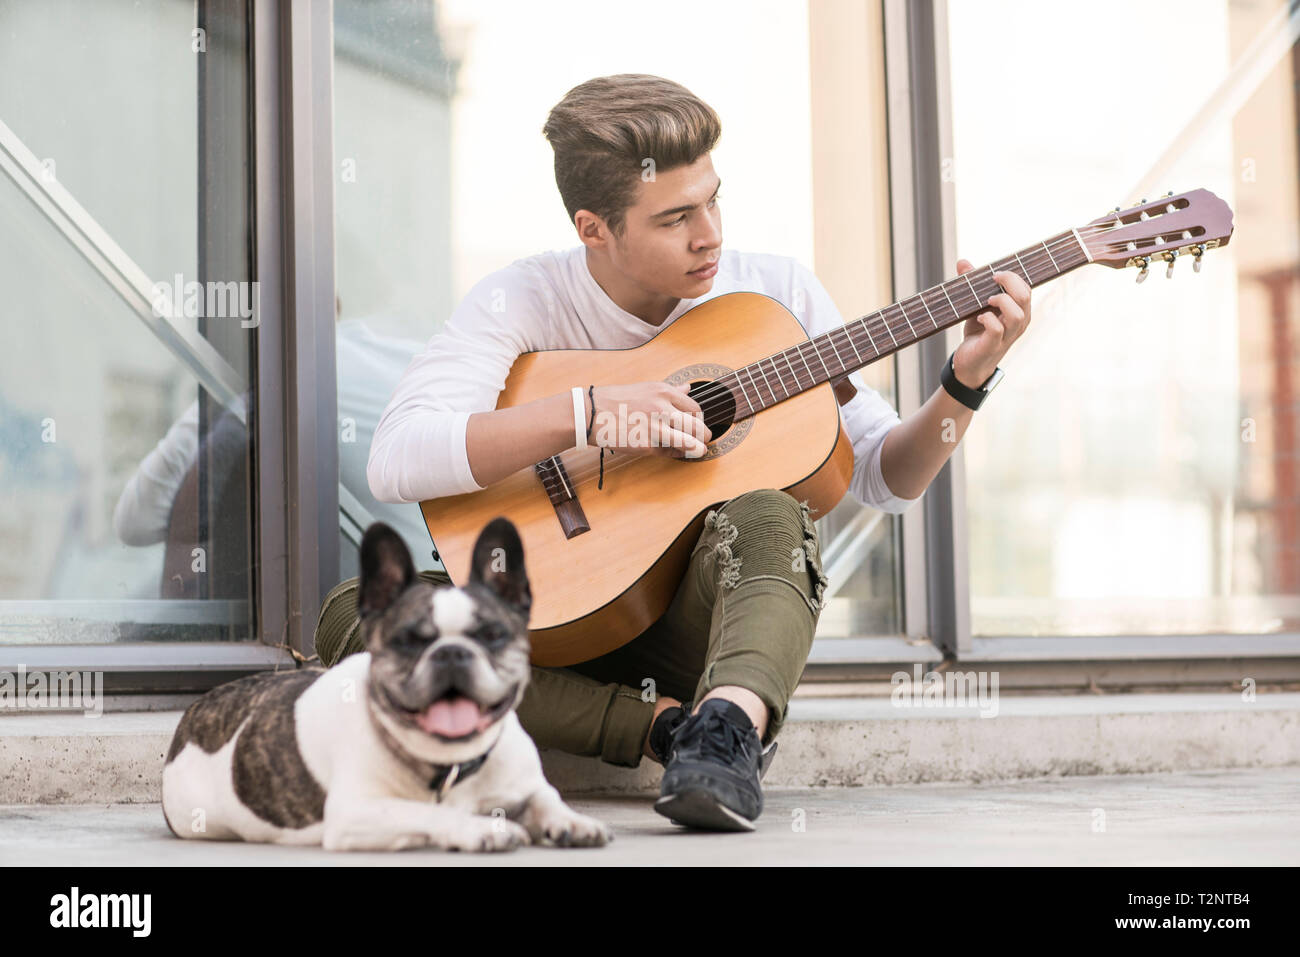 Teenage refugee boy playing guitar on pavement with dog Stock Photo